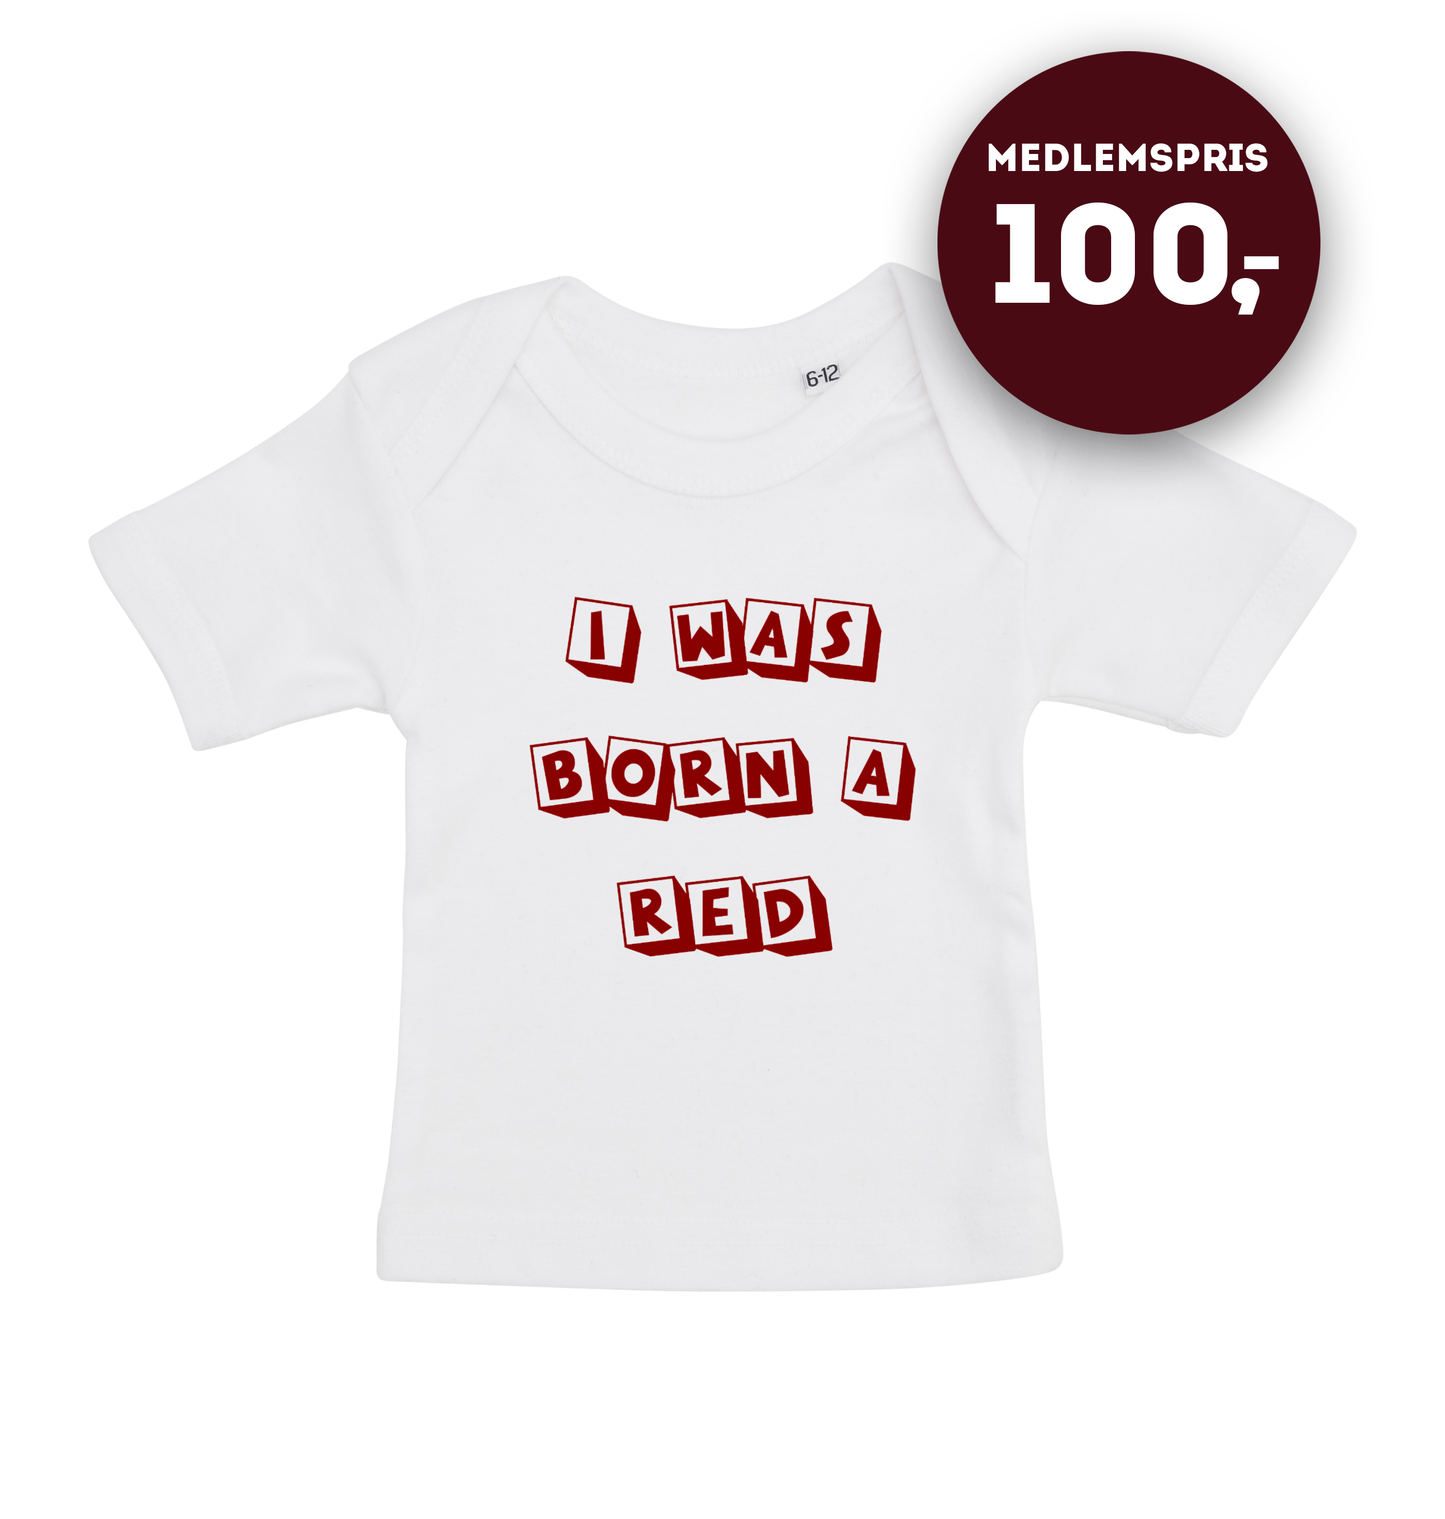 I was born a red - baby t-shirt